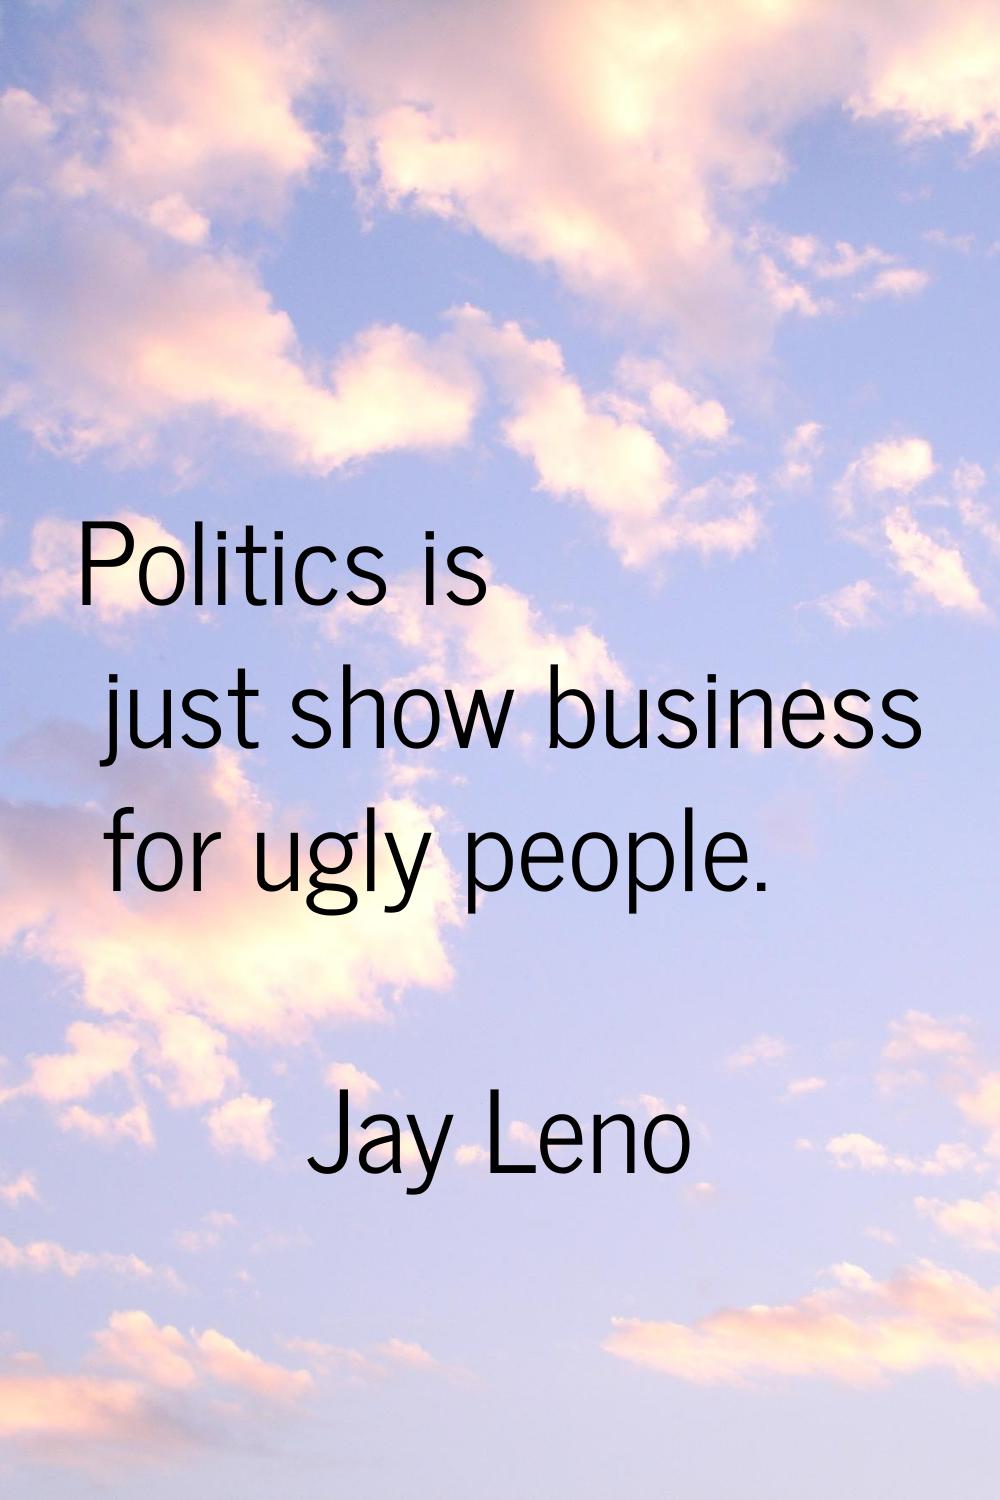 Politics is just show business for ugly people.